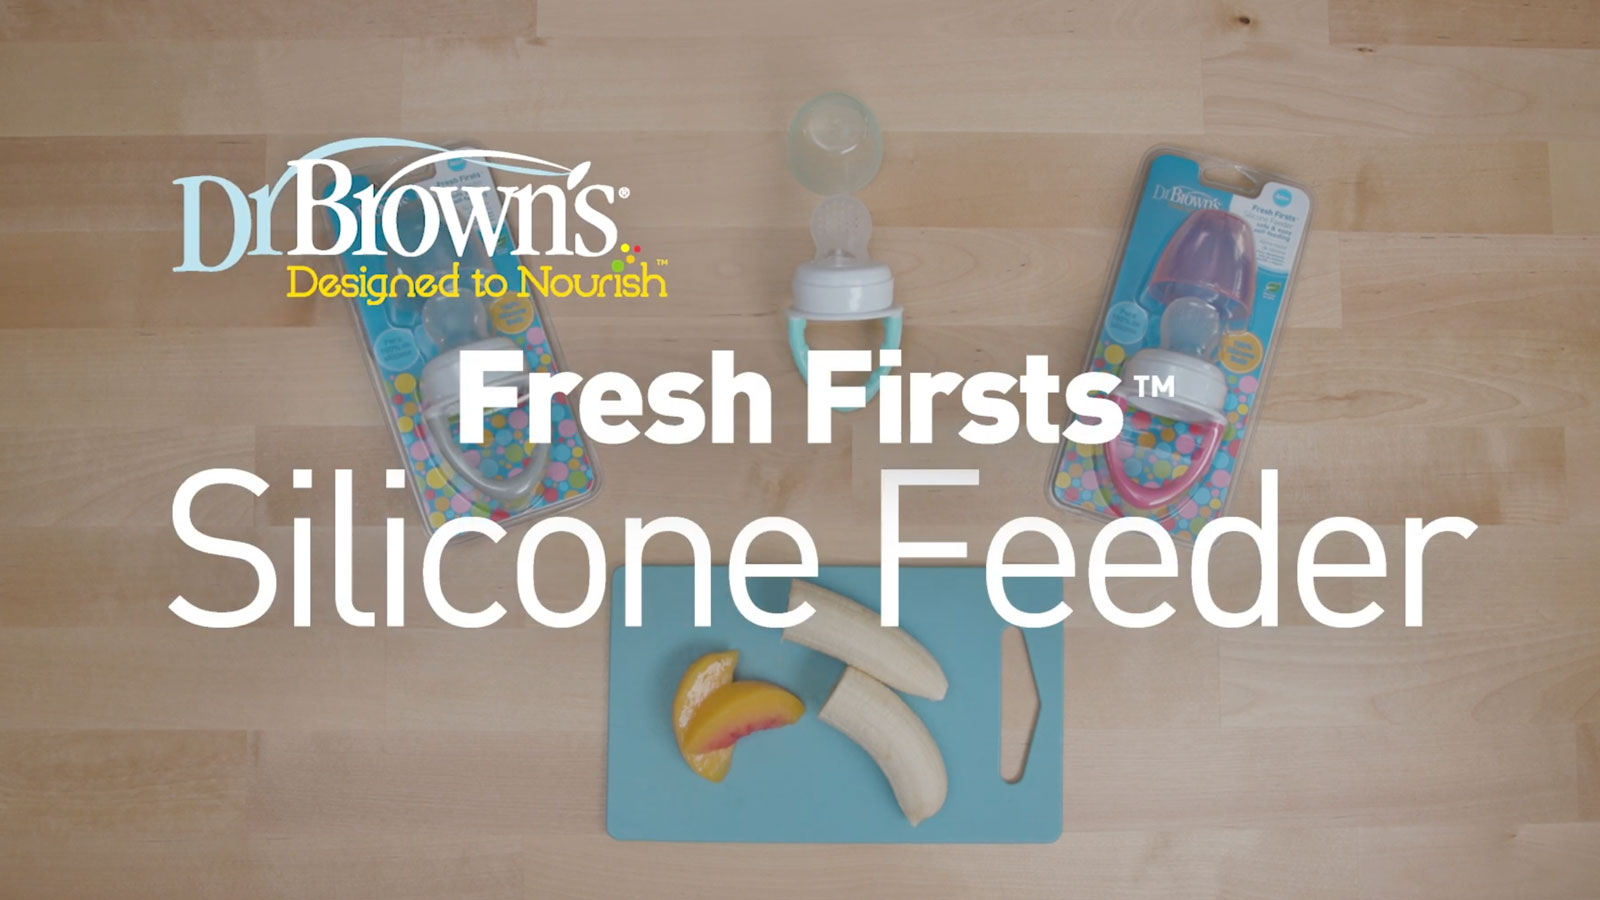 Dr. Brown's Dr. Brown’s™ Fresh Firsts™ Silicone Feeder